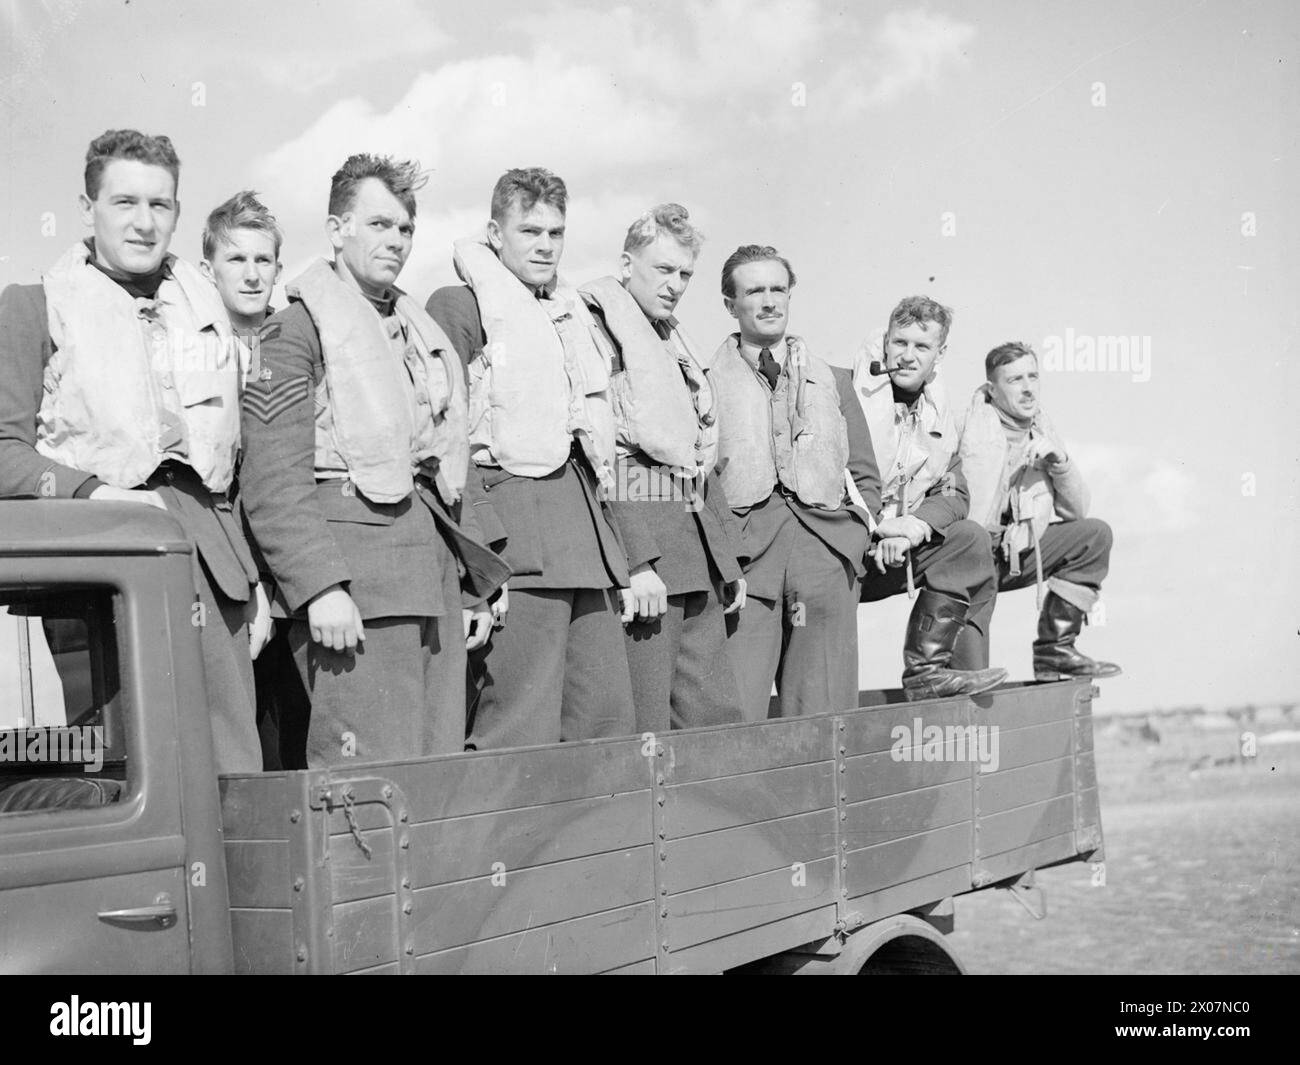 THE BATTLE OF BRITAIN 1940 - Pilots of No. 19 Squadron standing in the back of a lorry at Fowlmere, September 1940. The pilots are, from left to right, P/O Arthur Vokes, Sgt David Cox, F/Sgt George Unwin, P/O Richard Jones, Sgt Bernard Jennings, P/O Dennis Parrott, unknown, unknown Stock Photo